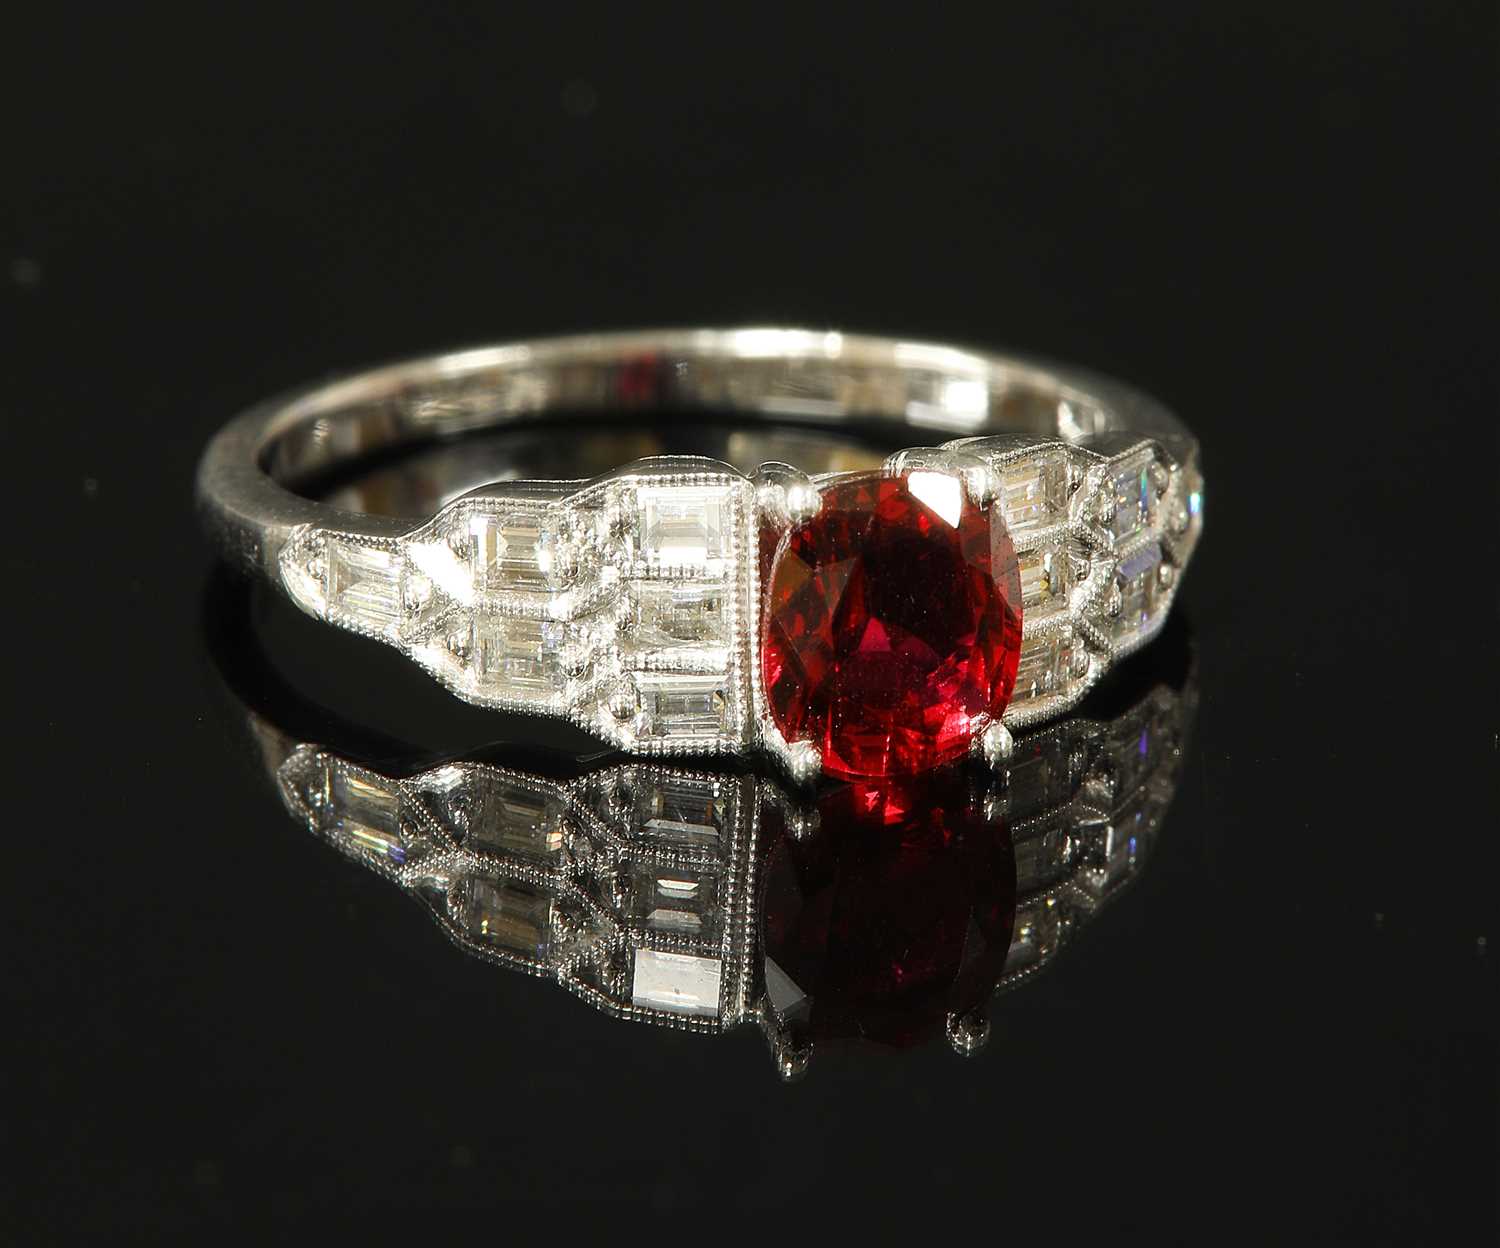 Lot 178 - An Art Deco-style unheated ruby and diamond ring